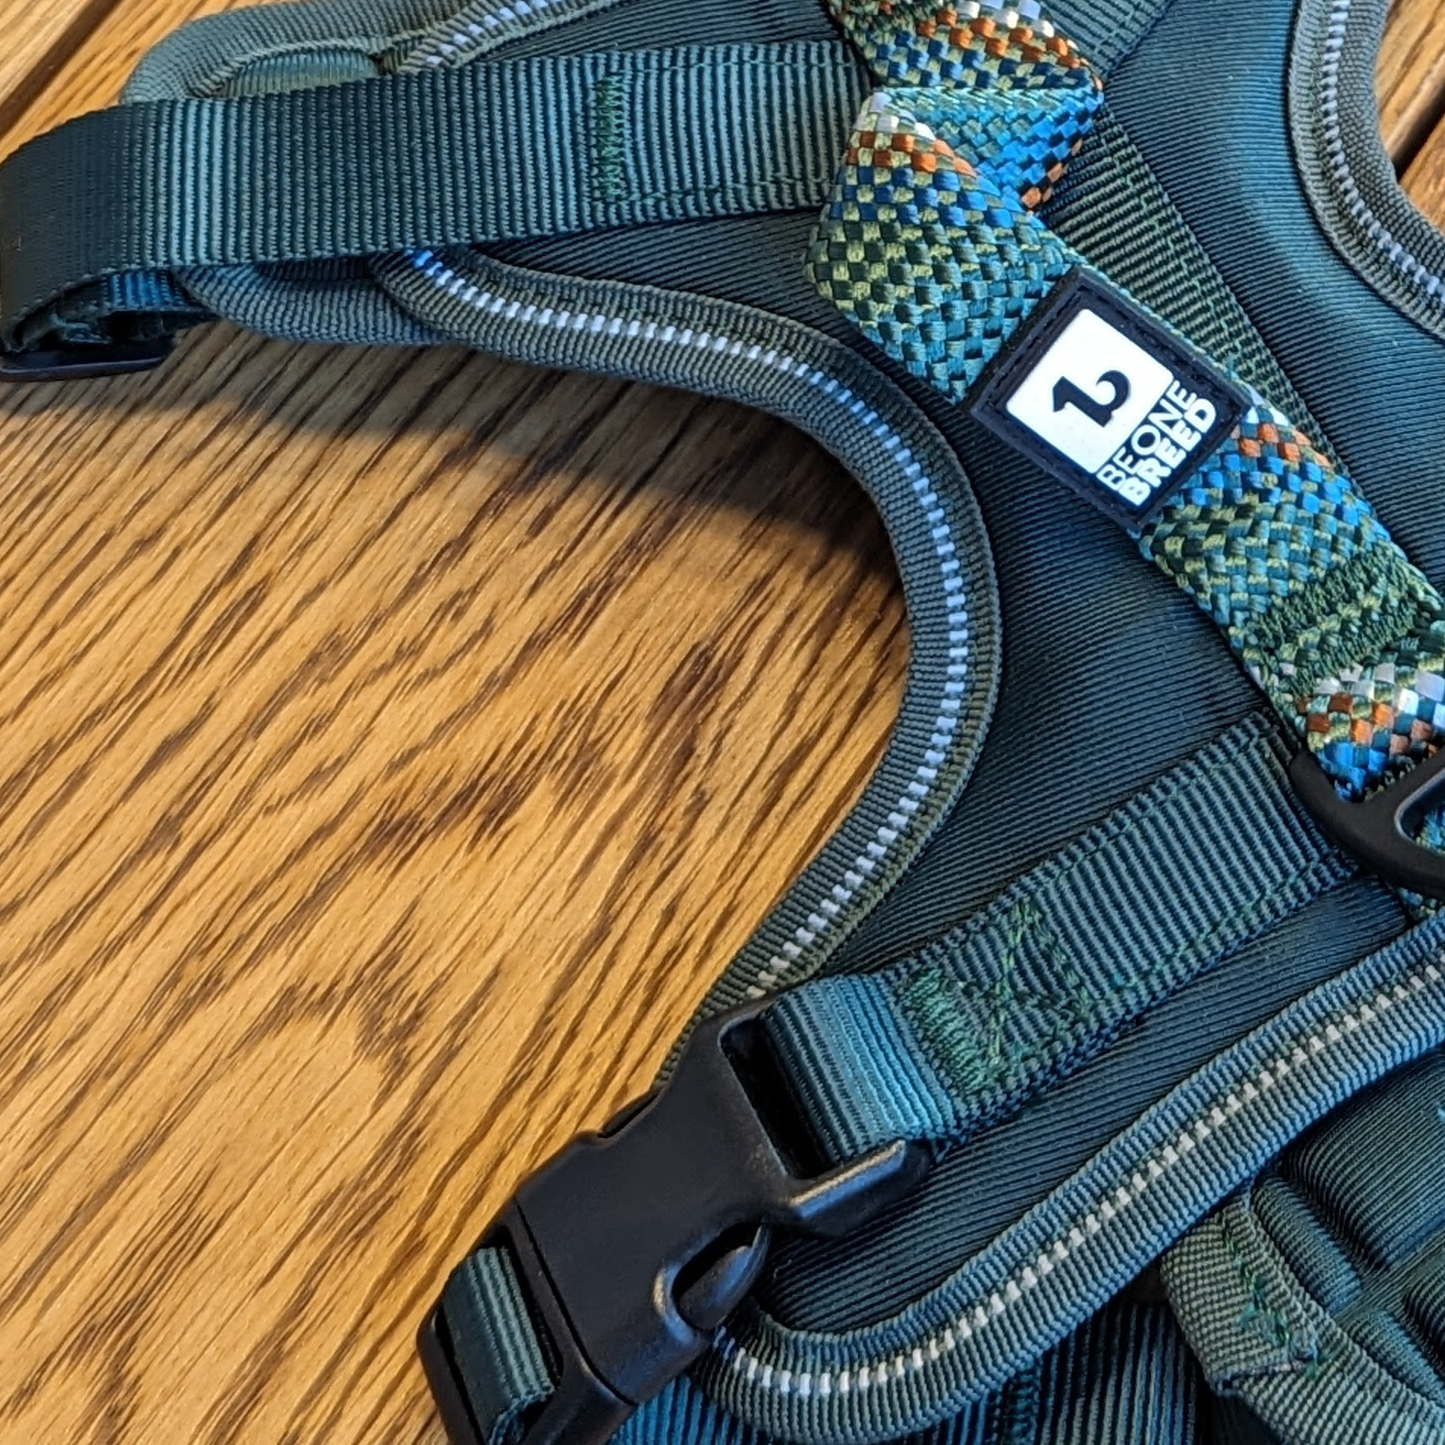 Paracord dog harness